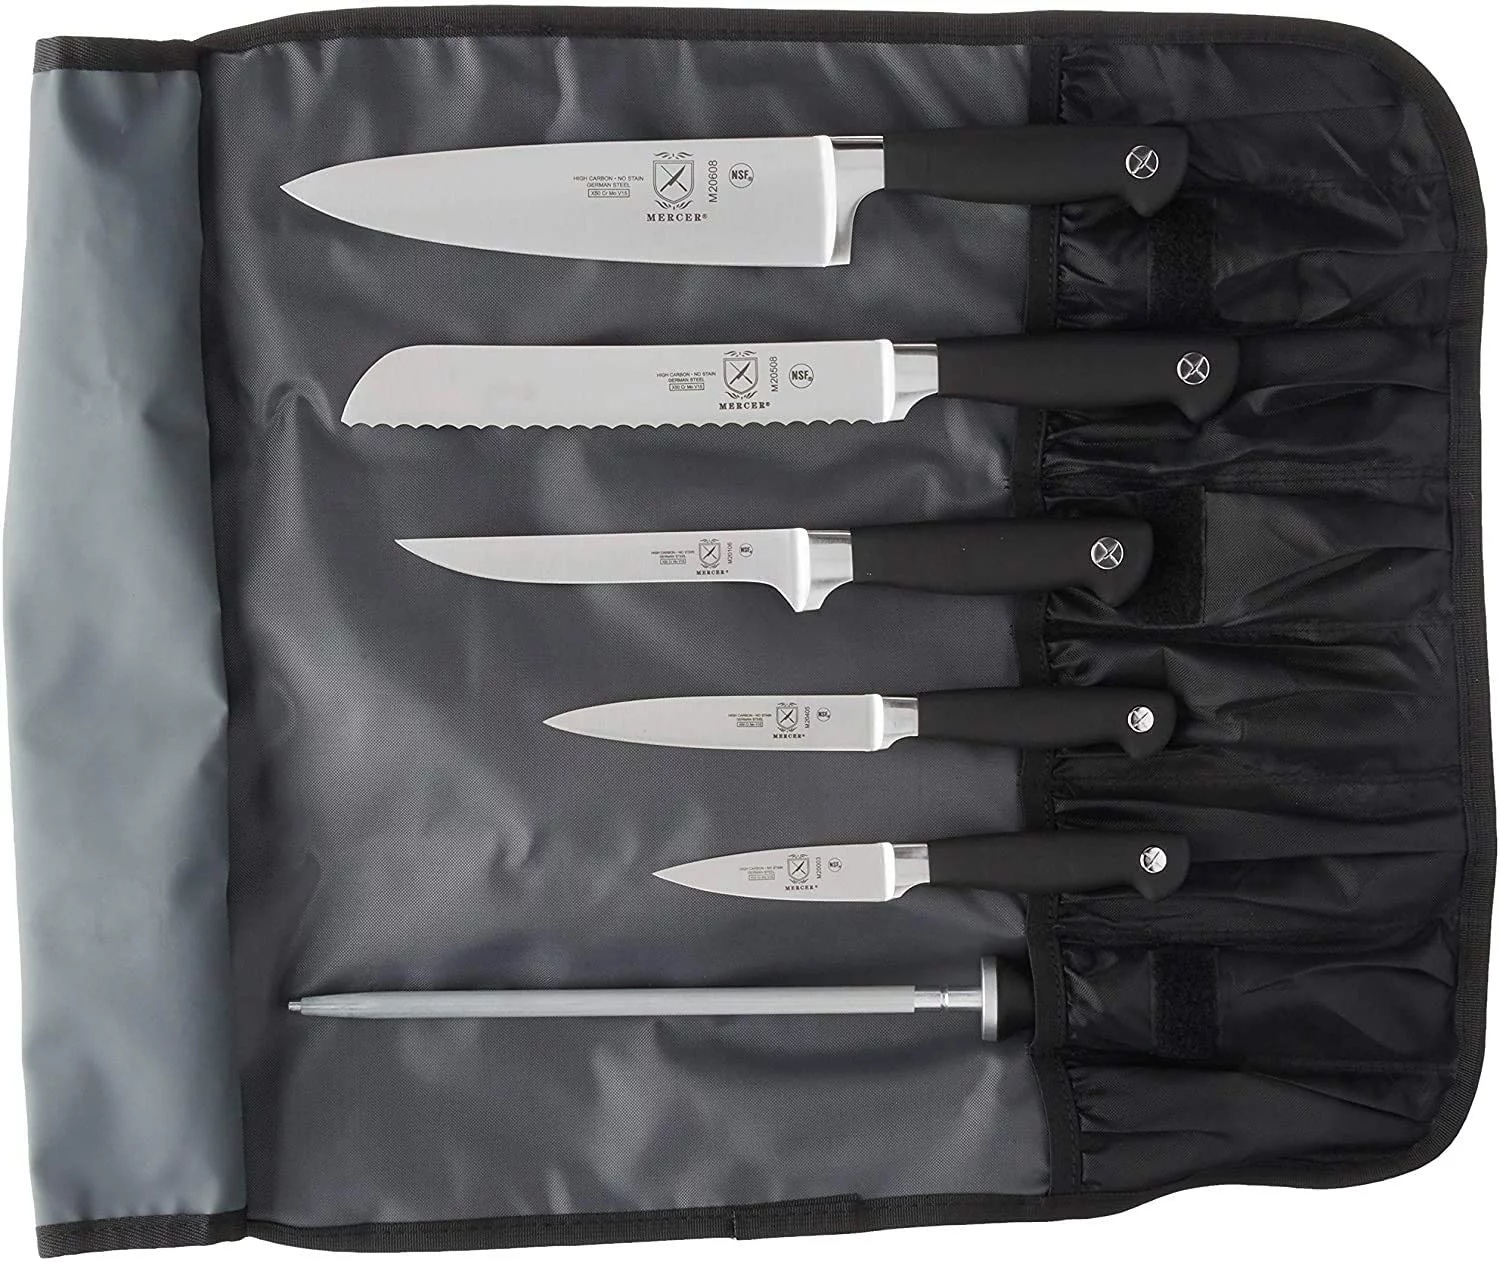 The Best Knife Set, According to Our Equipment Reviews